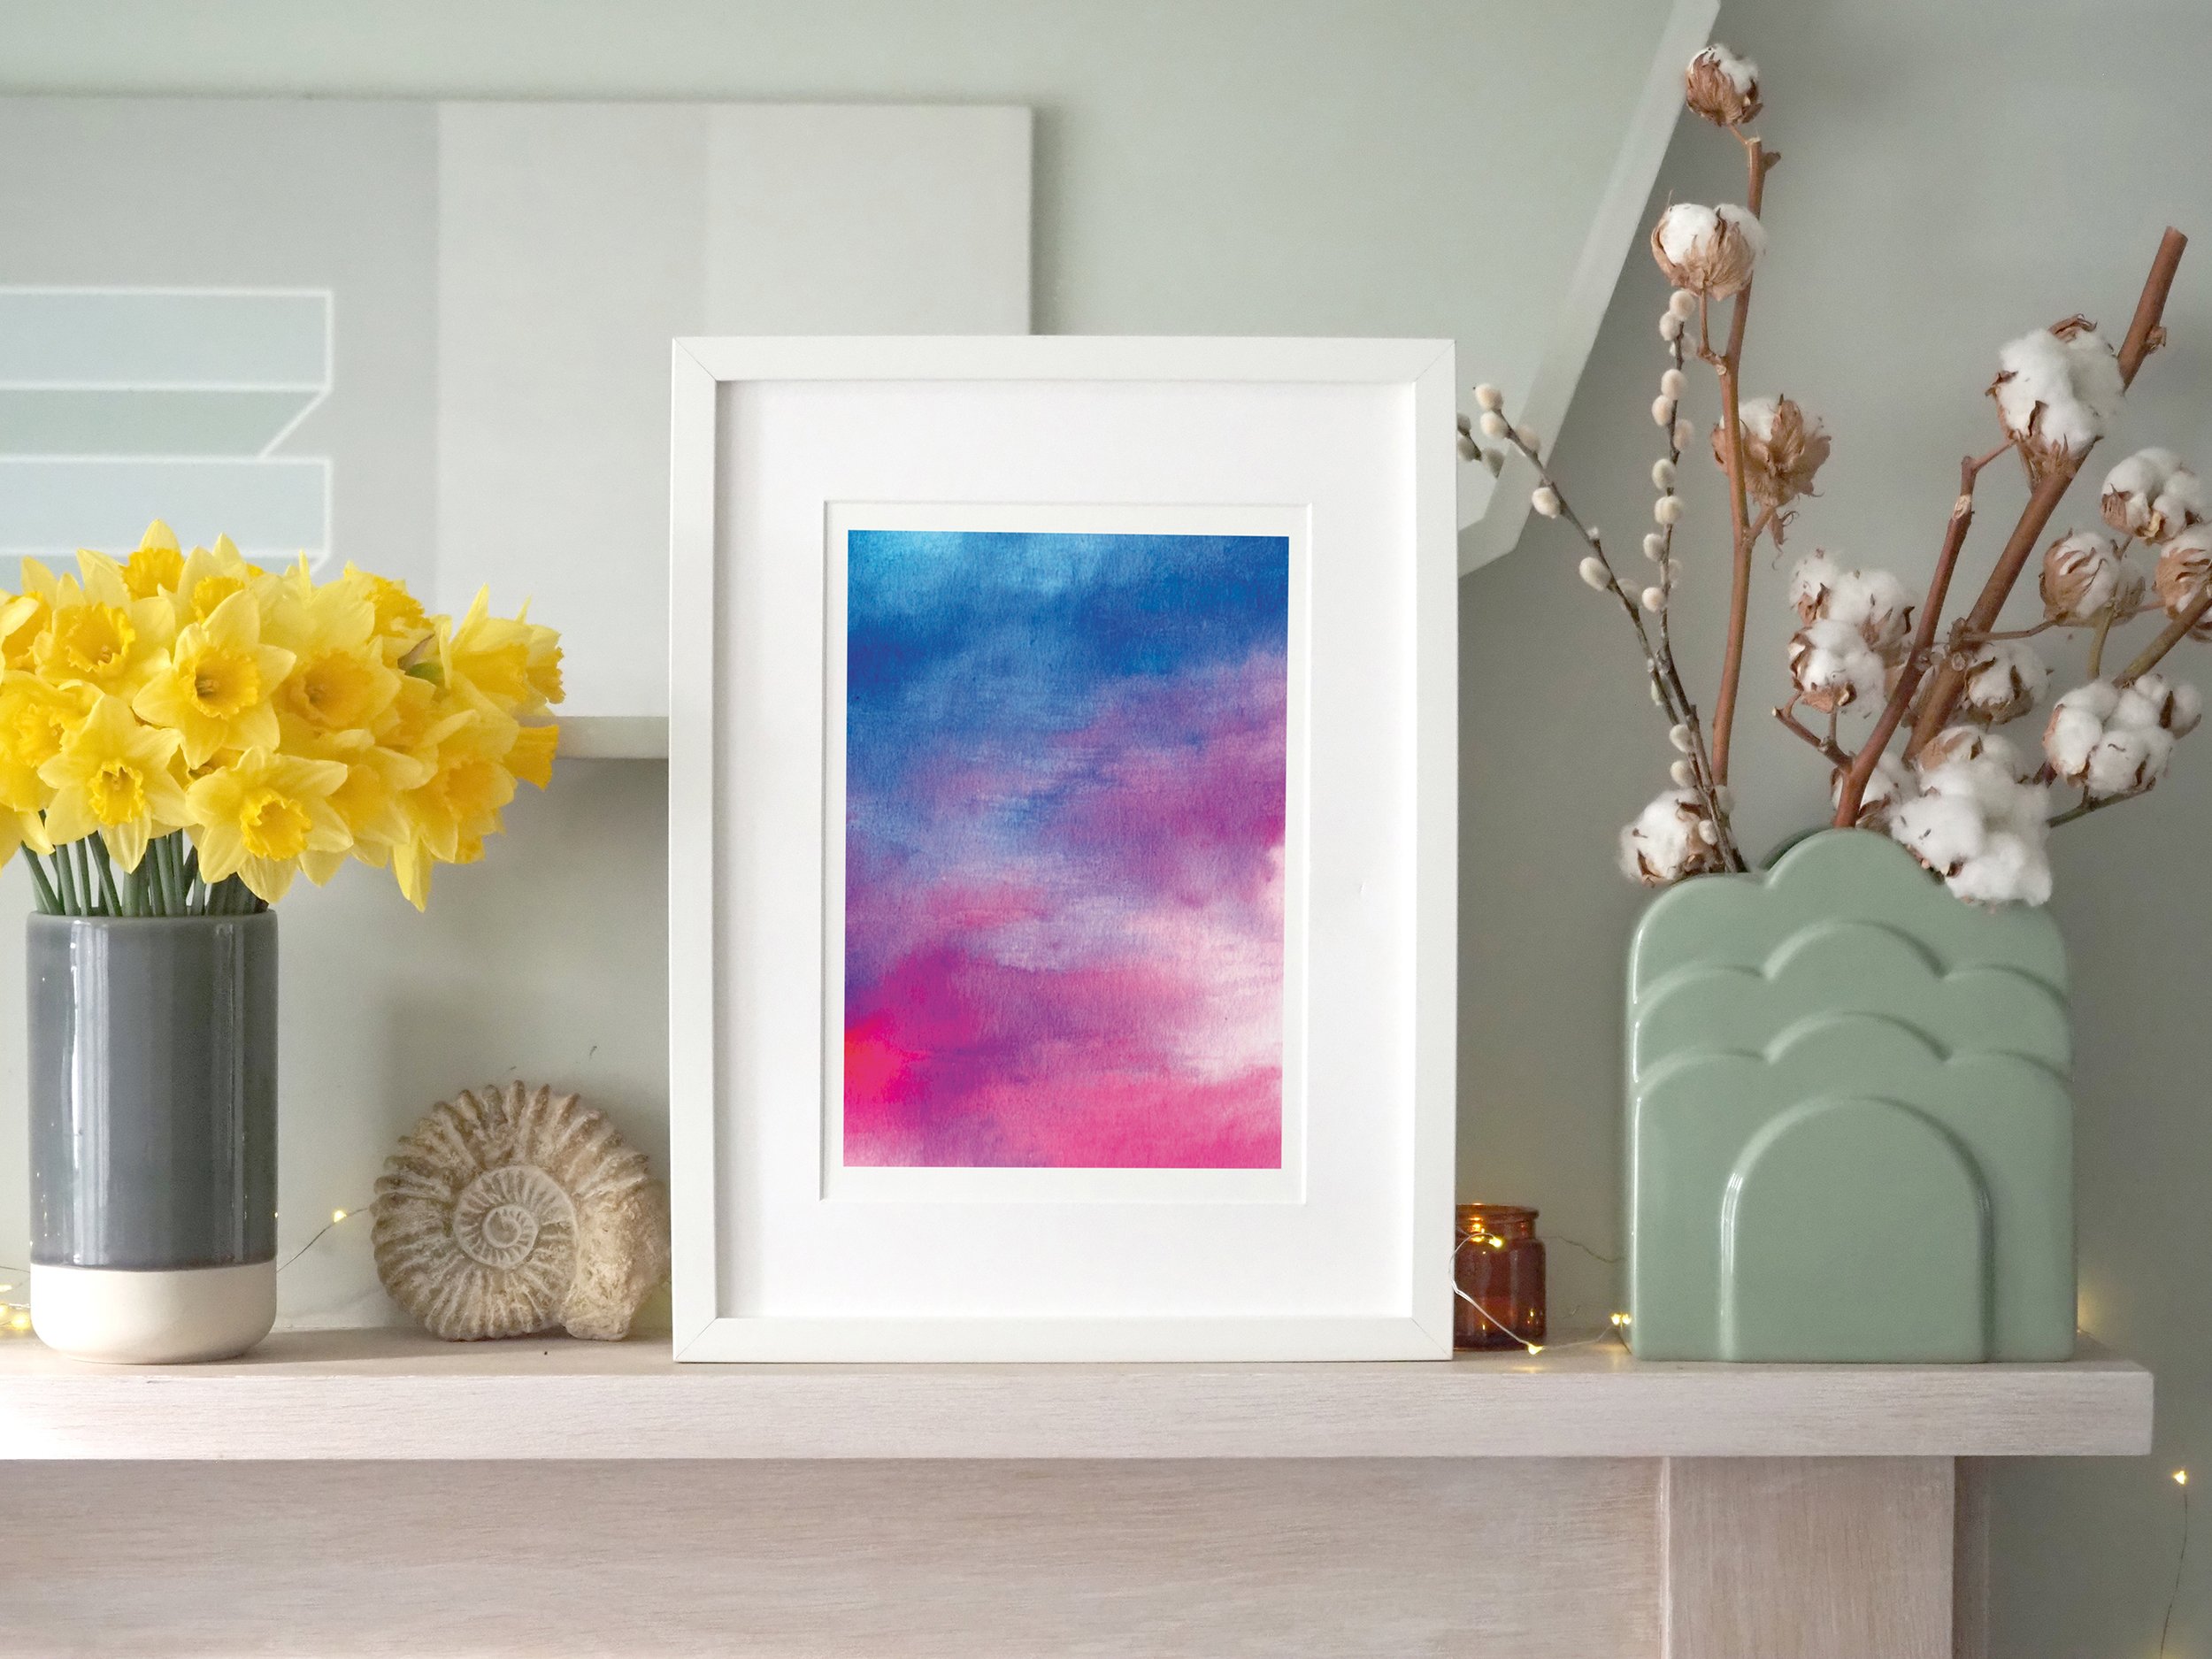 Blue Pink Abstract A4 Print by Drawn Together Art in White frame on mantle vase mirror daffodils ammonite fossil.jpg